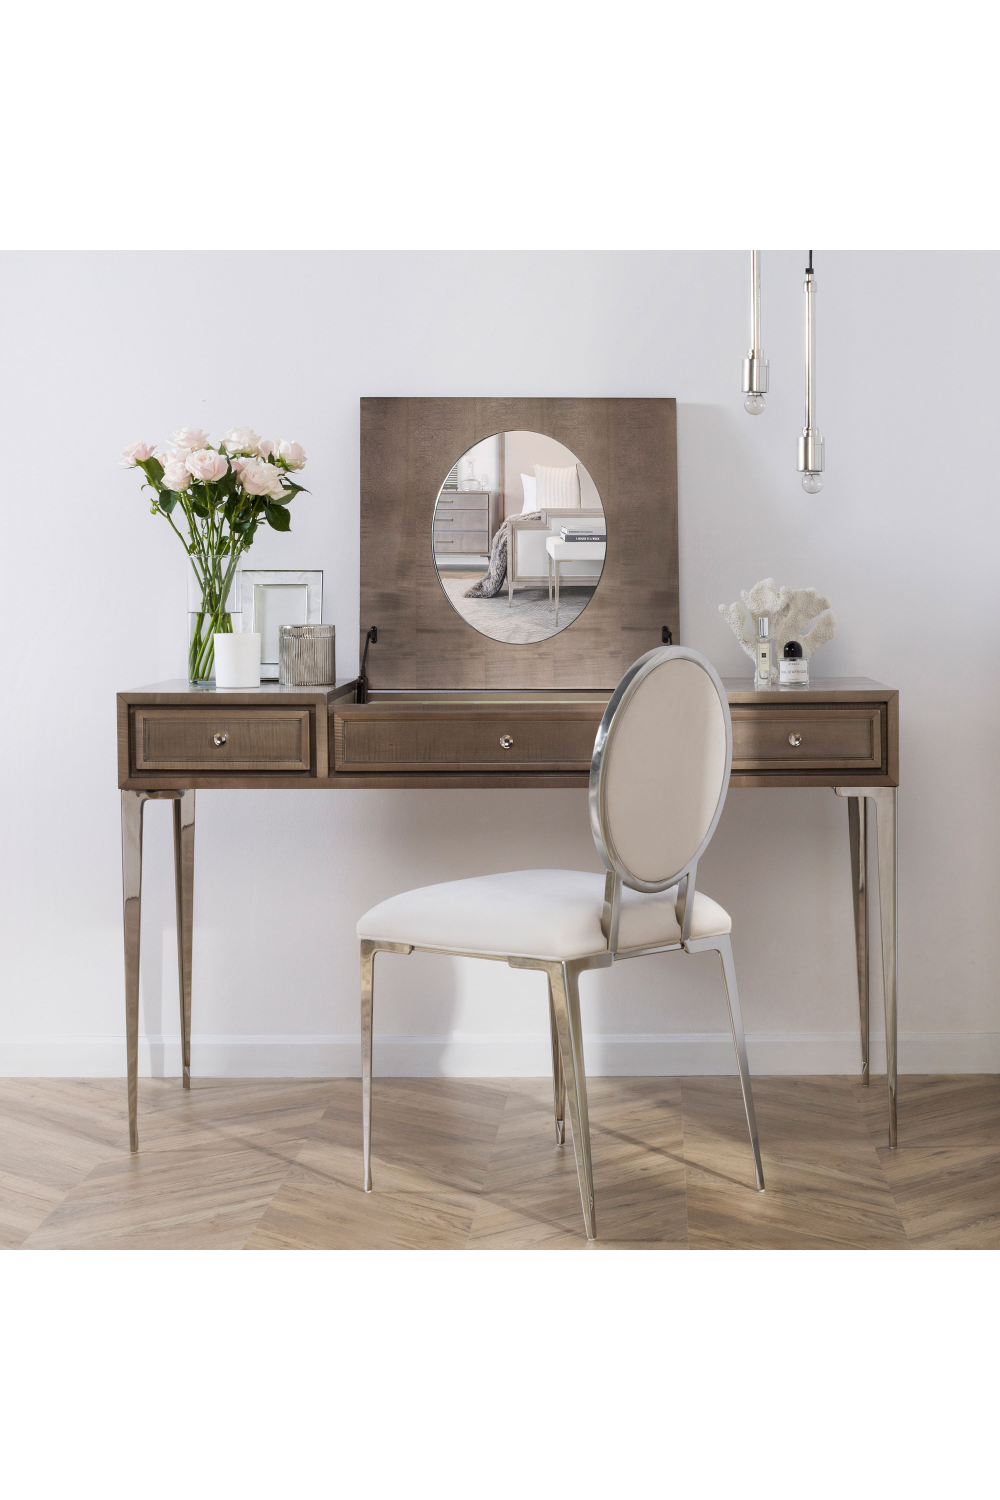 Mink Contemporary Dressing Table with Mirror | Andrew Martin | OROA